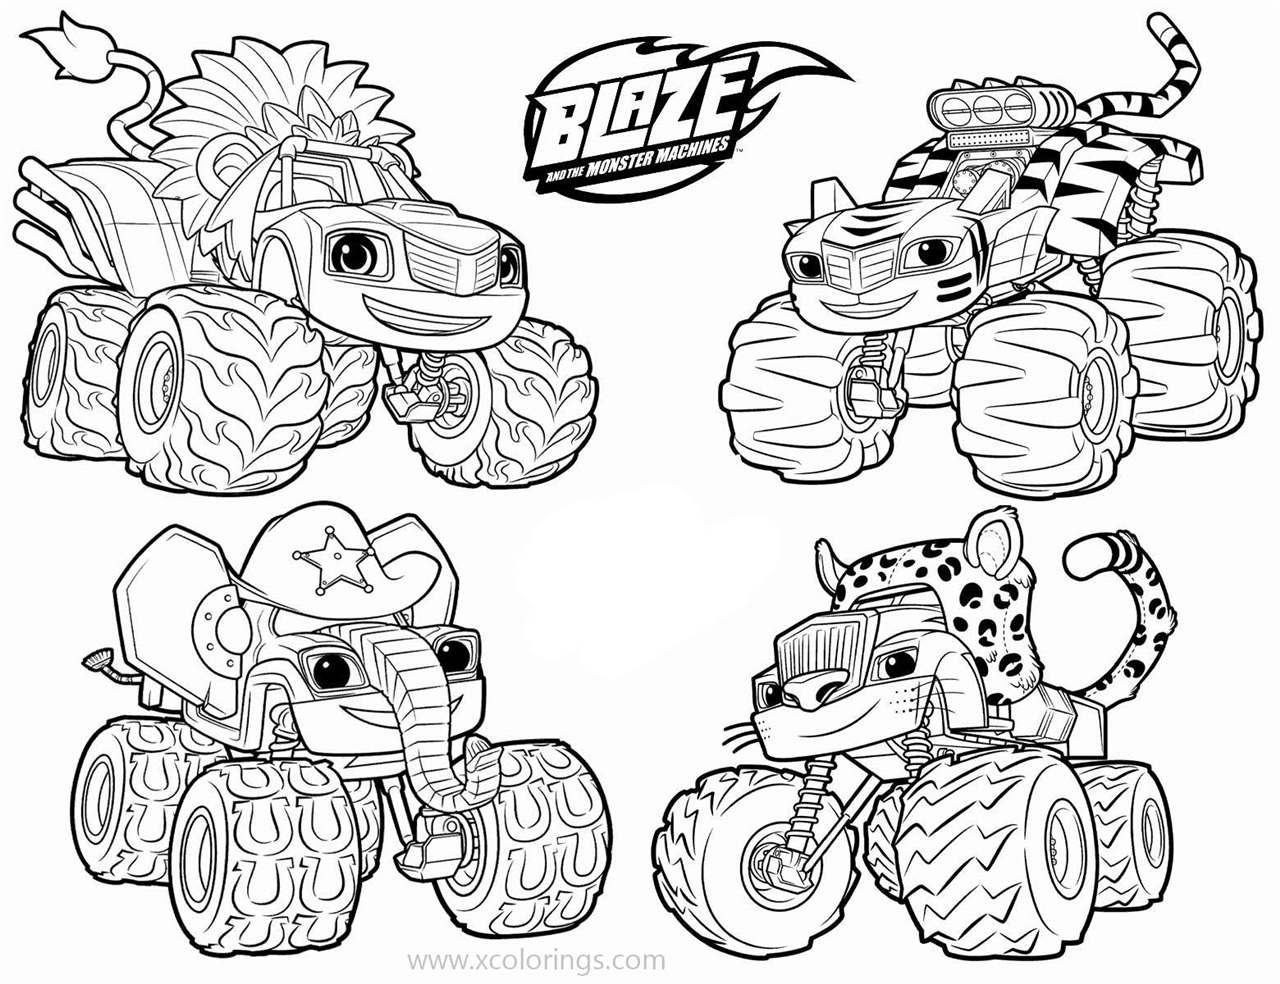 Free Blaze and the Monster Machines Coloring Pages Blaze Wild Wheels printable